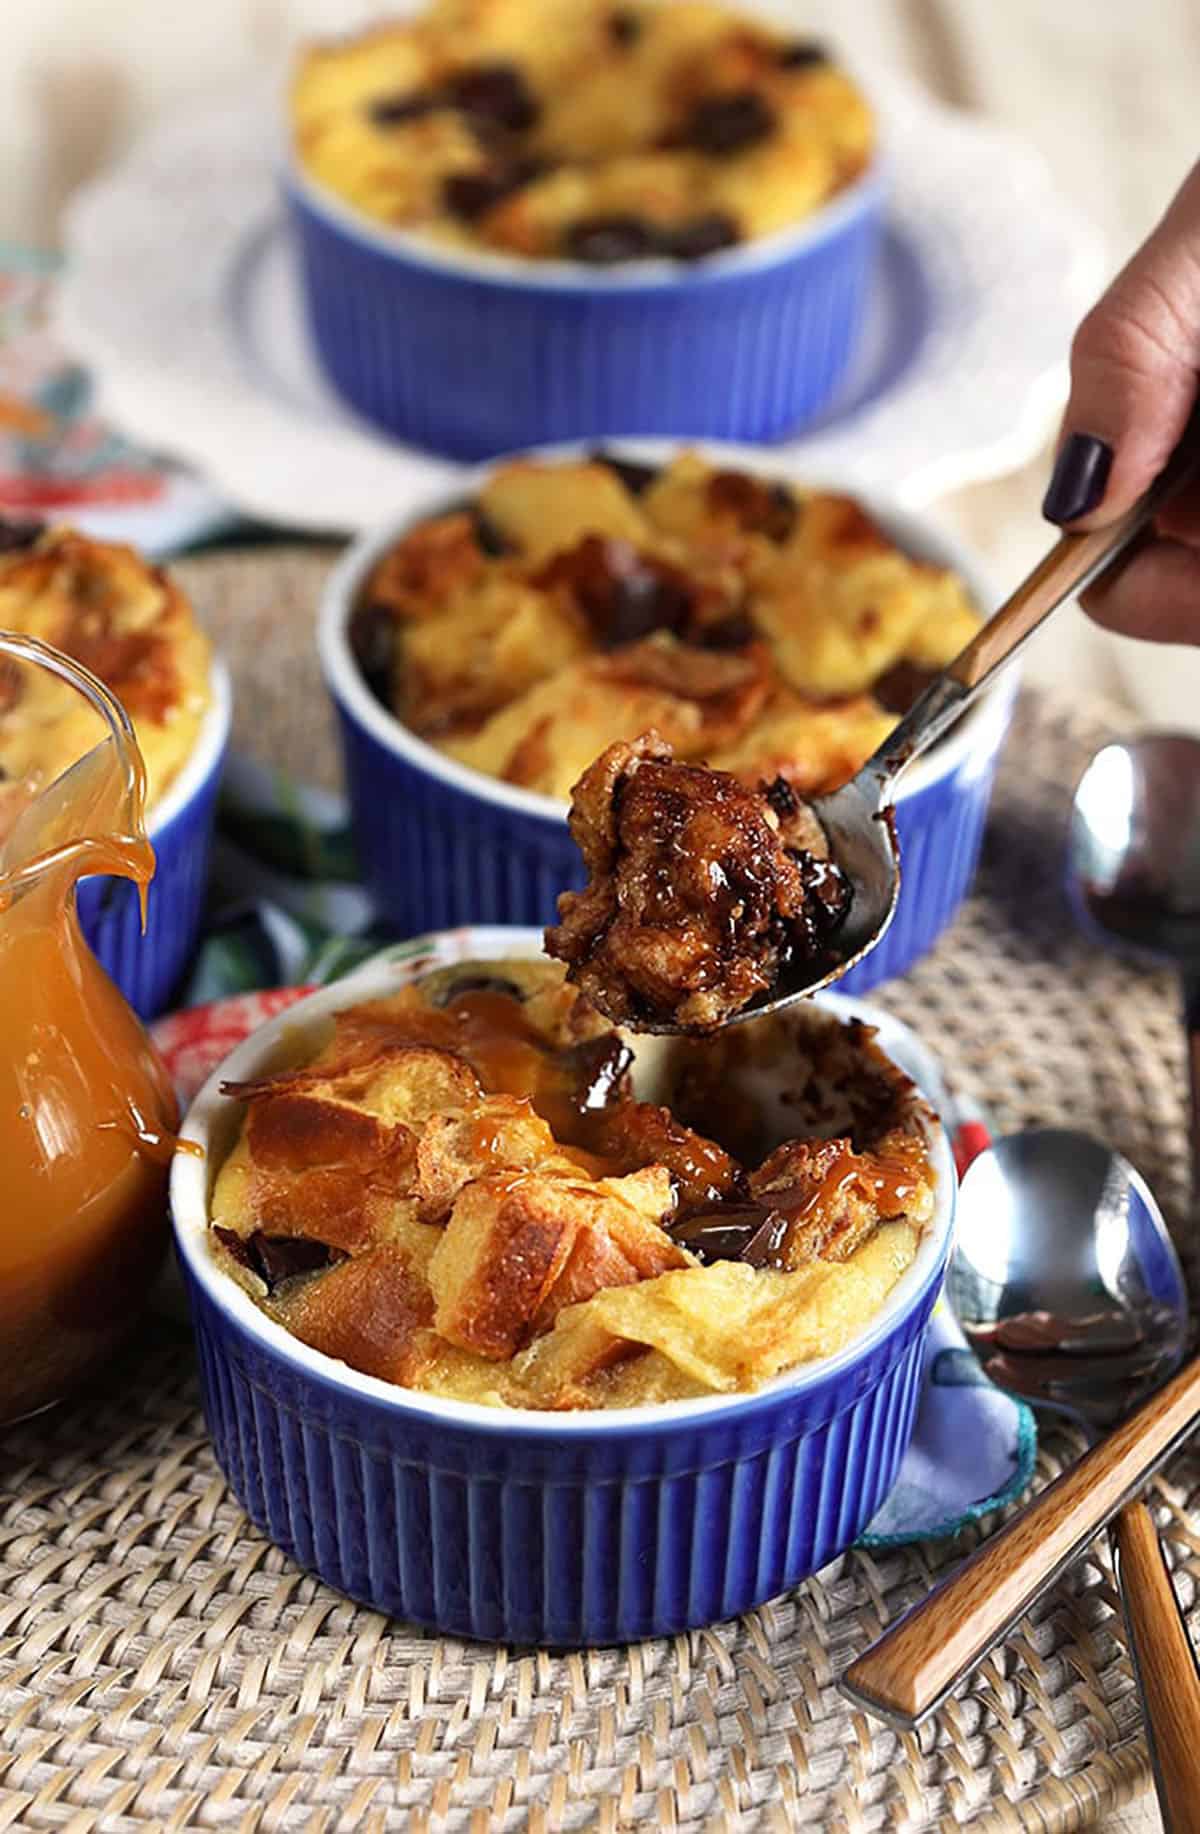 Brioche bread pudding in a blue ramekin with a wooden spoon digging into it.